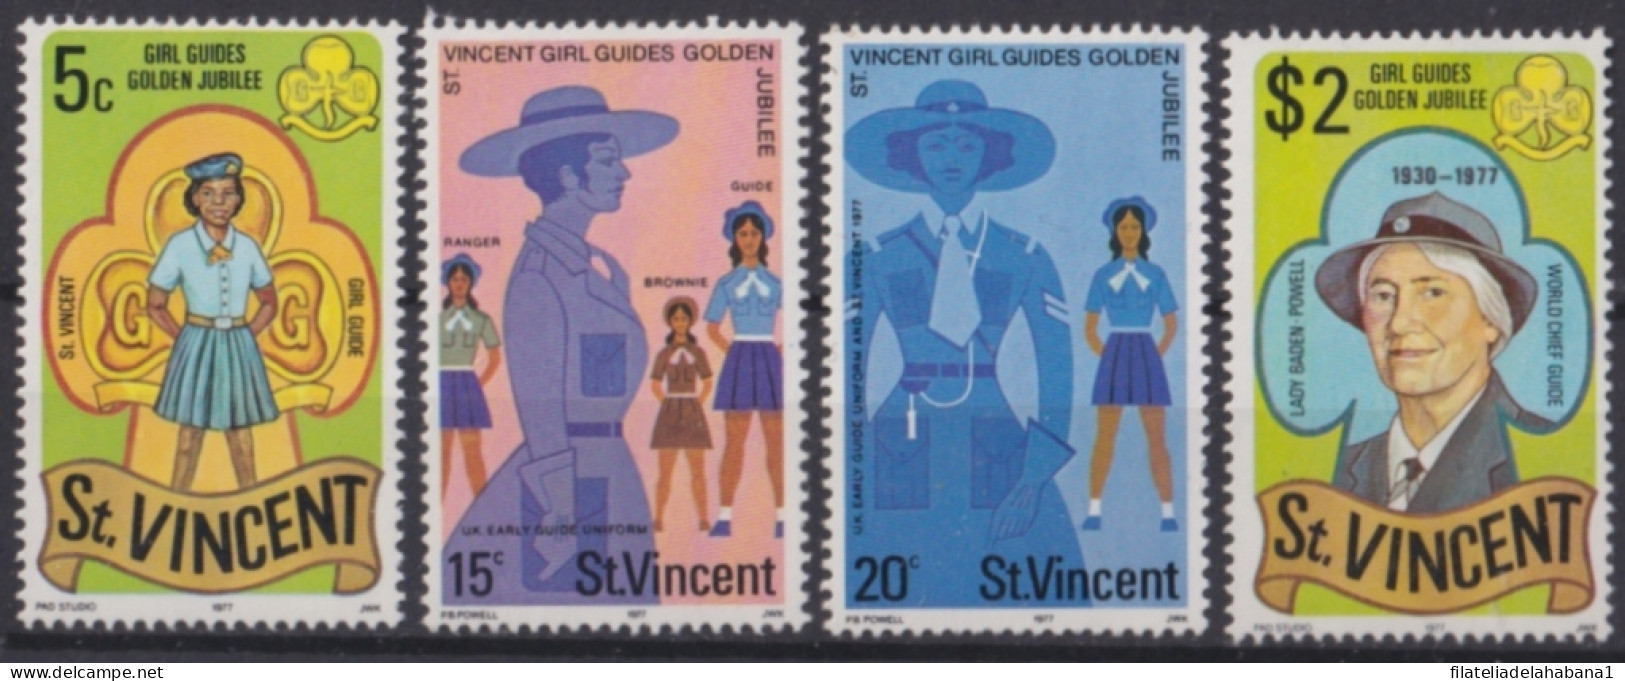 F-EX48322 ST VINCENT MNH 1977 MNH BOYS SCOUTS 50º ANNIV OF GIRL GUIDE.  - Unused Stamps